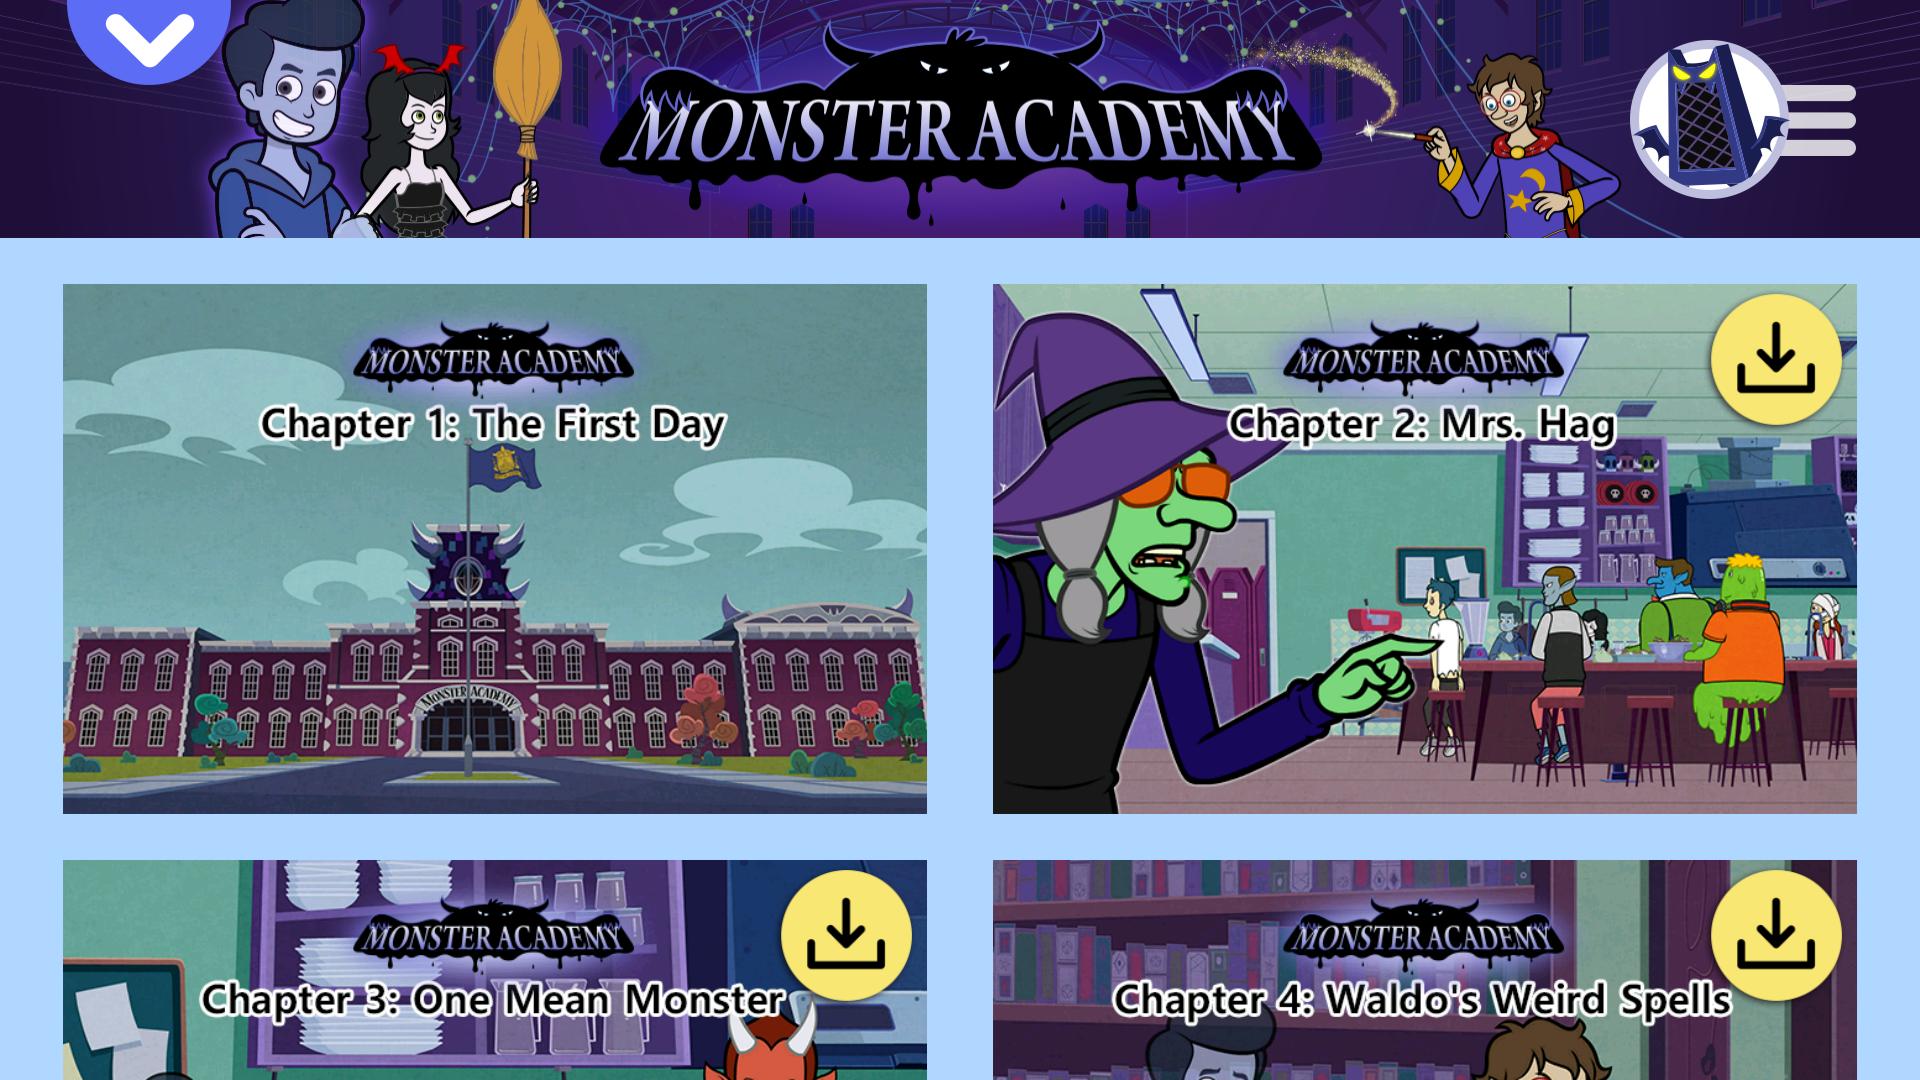 Monster Academy for Android - APK Download